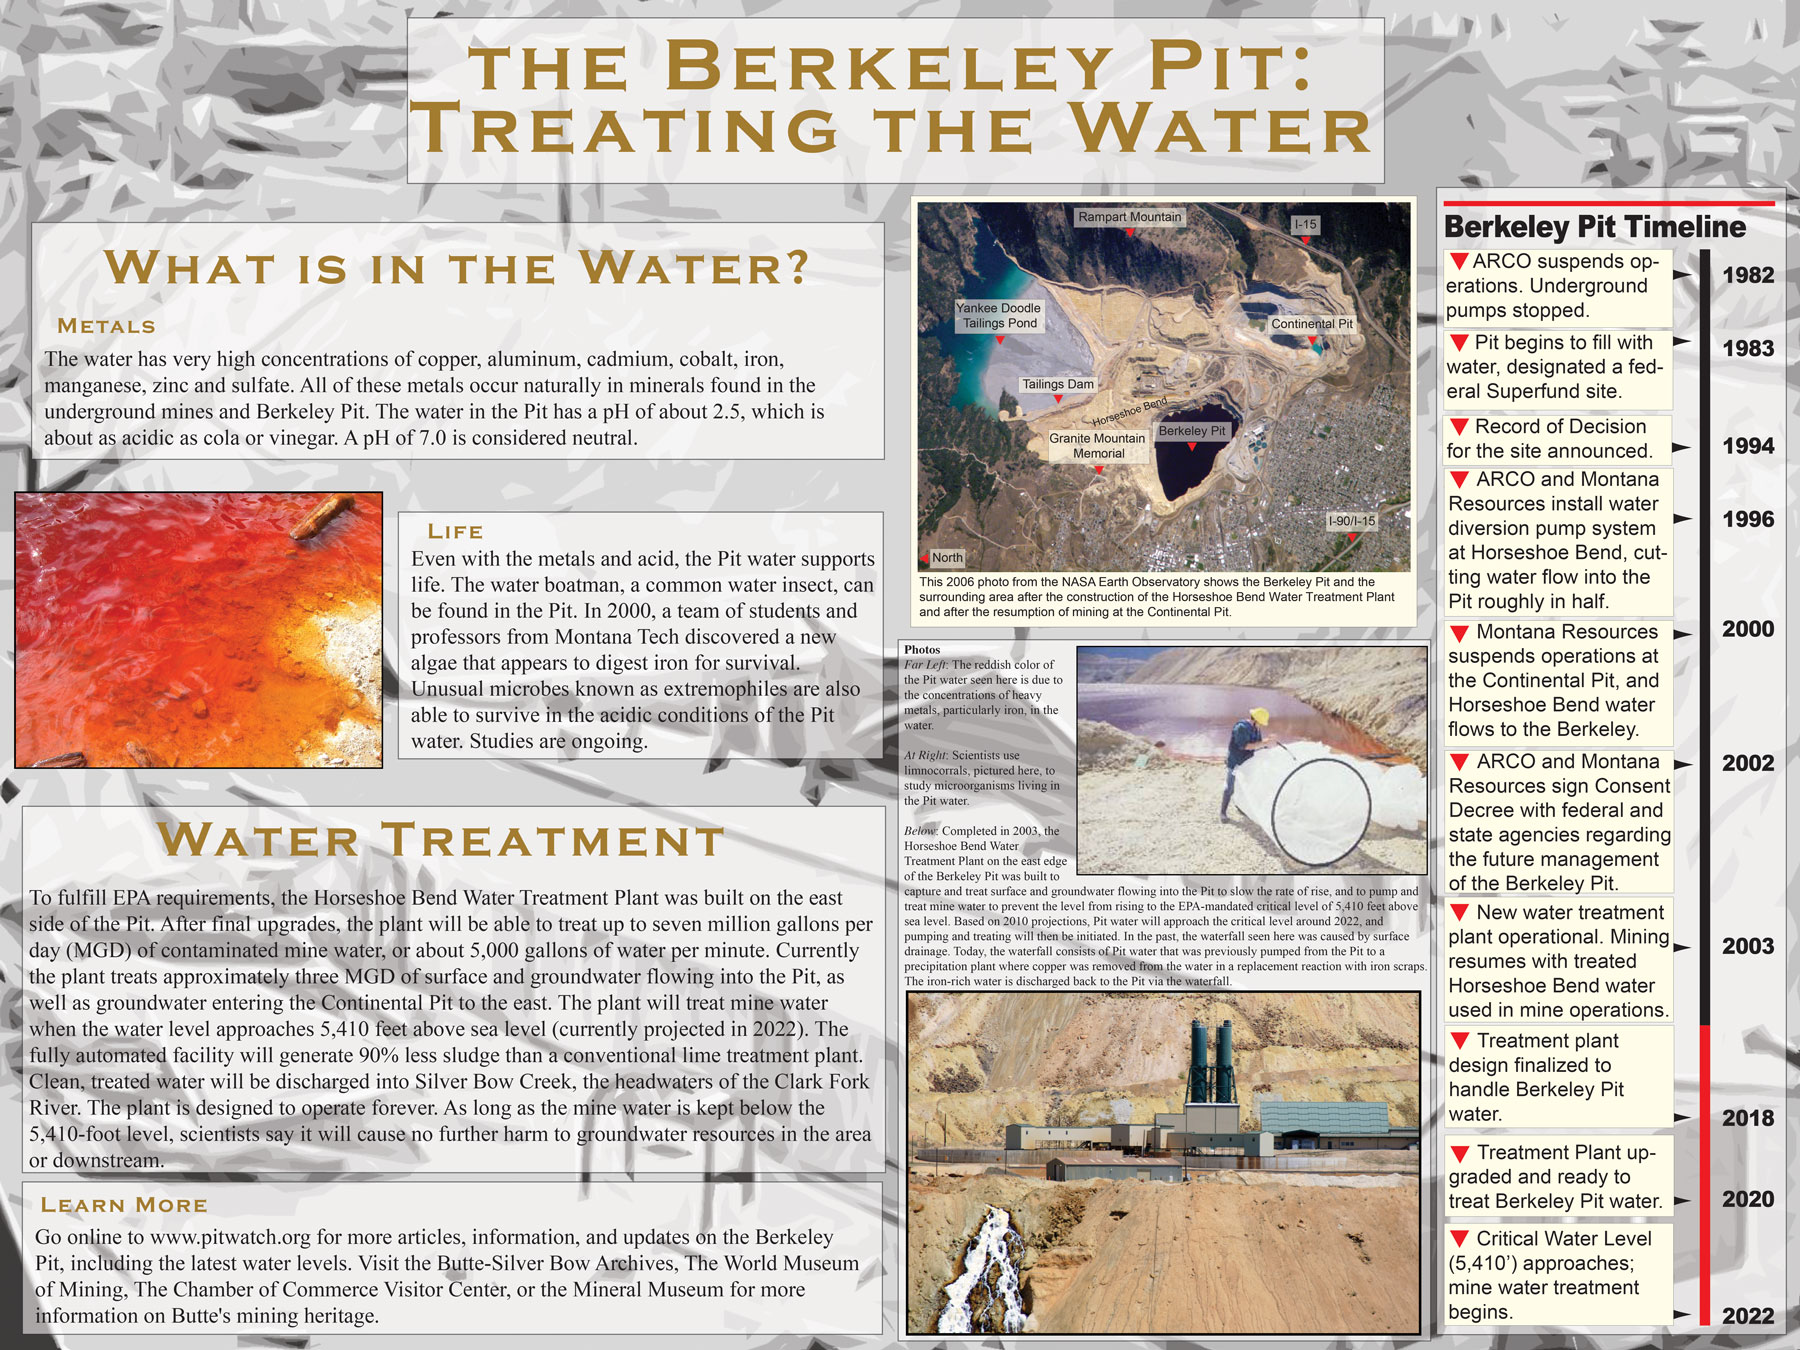 Berkeley Pit Poster Series: Treating the Water. Click on the image to view a larger version, or use the links at the bottom of the page to download a high-resolution version.